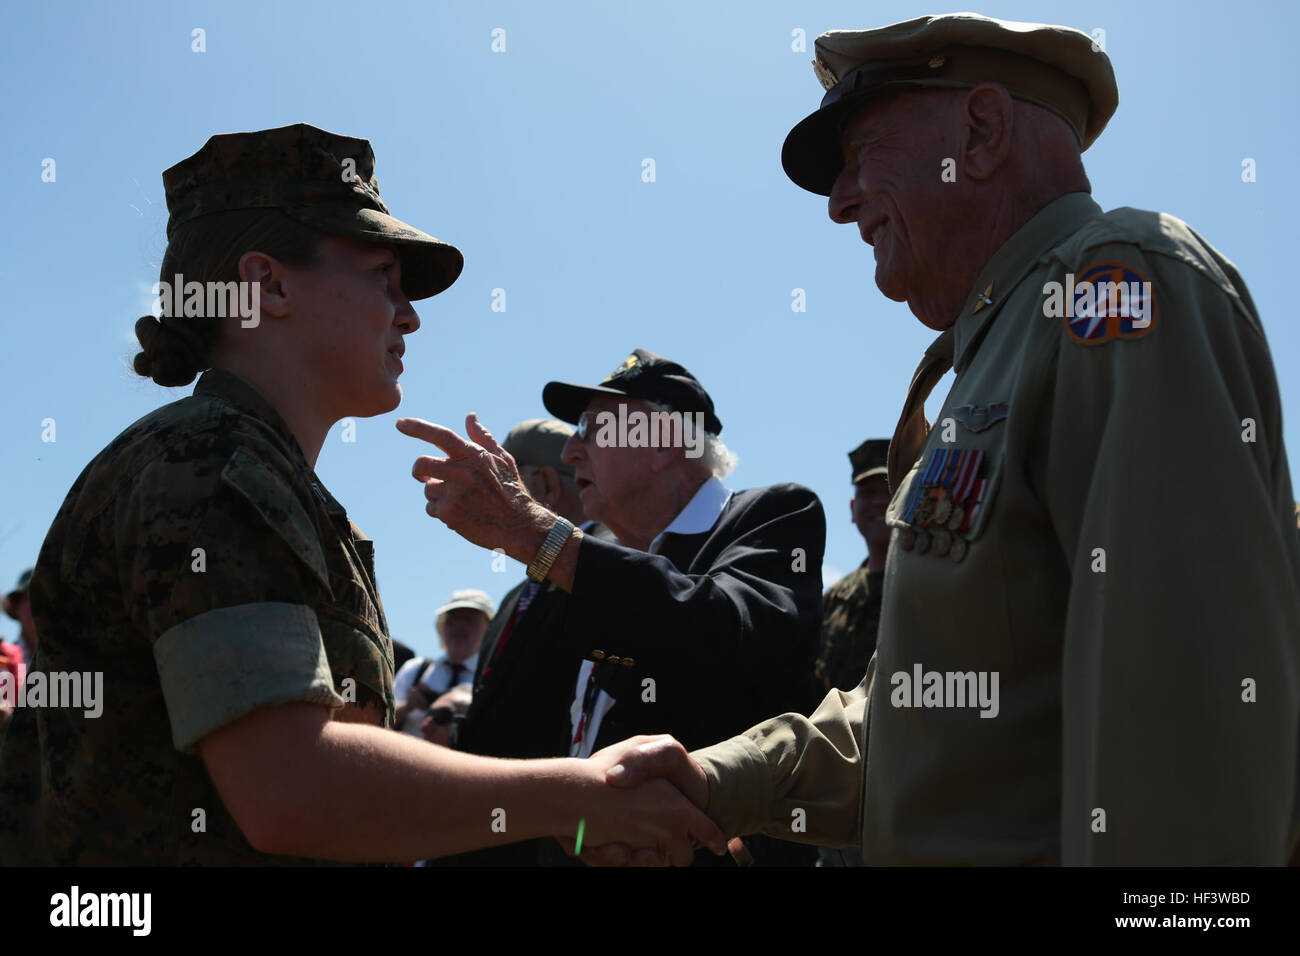 A U. S. Marine Corps Corporal, left, shakes the hand of Retired U.S. Army Air Corps Capt. Jerry Yellin , at the 71st Commemoration of the Battle of Iwo Jima at Iwo To, Japan, March 19, 2016. The Iwo Jima Reunion of Honor is an opportunity for Japanese and U.S. veterans and their families, dignitaries, leaders and service members from both nations to honor the battle while recognizing 71 years of peace and prosperity in the U.S. – Japanese alliance. (U.S. Marine Corps photo by MCIPAC Combat Camera Lance Cpl. Juan Esqueda / Released) Iwo Jima 71st Reunion of Honor 160319-M-JD520-090 Stock Photo